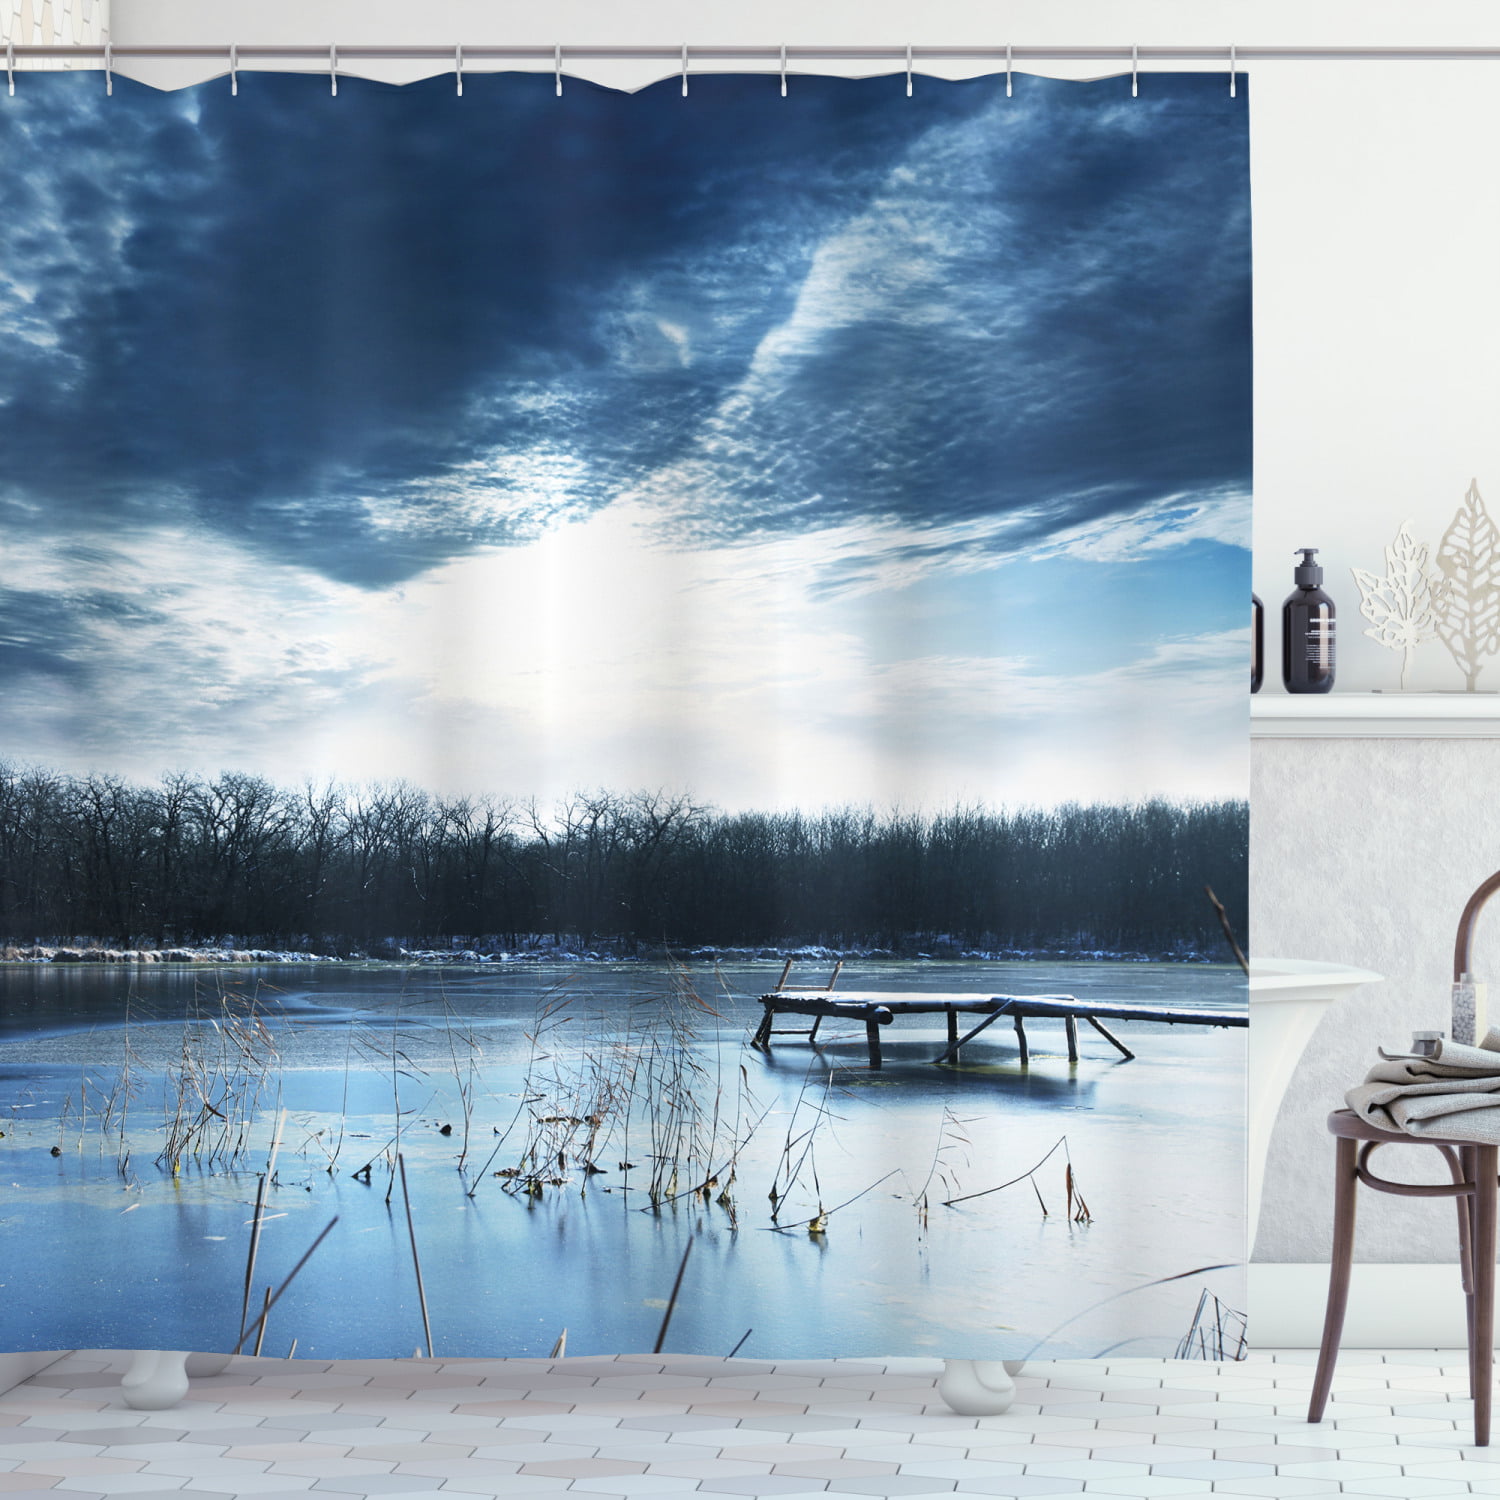 Details about   Winter Shower Curtain Mountain Frozen Lake Print for Bathroom